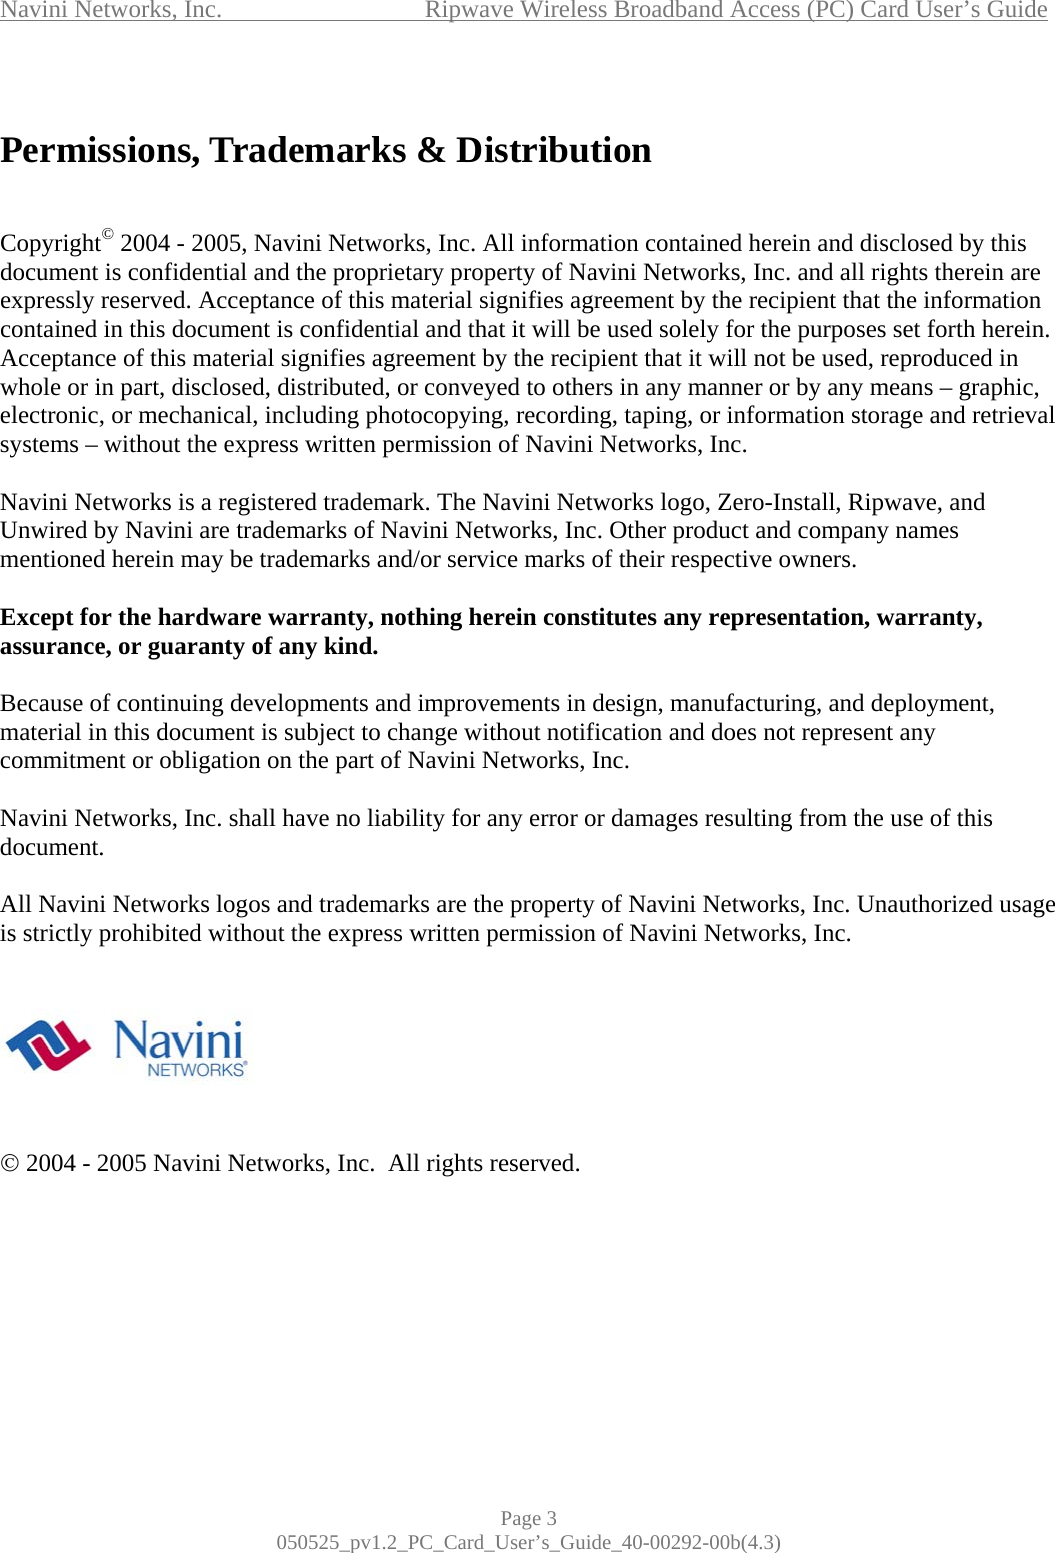 Navini Networks, Inc.             Ripwave Wireless Broadband Access (PC) Card User’s Guide Page 3 050525_pv1.2_PC_Card_User’s_Guide_40-00292-00b(4.3)  Permissions, Trademarks &amp; Distribution   Copyright© 2004 - 2005, Navini Networks, Inc. All information contained herein and disclosed by this document is confidential and the proprietary property of Navini Networks, Inc. and all rights therein are expressly reserved. Acceptance of this material signifies agreement by the recipient that the information contained in this document is confidential and that it will be used solely for the purposes set forth herein. Acceptance of this material signifies agreement by the recipient that it will not be used, reproduced in whole or in part, disclosed, distributed, or conveyed to others in any manner or by any means – graphic, electronic, or mechanical, including photocopying, recording, taping, or information storage and retrieval systems – without the express written permission of Navini Networks, Inc.  Navini Networks is a registered trademark. The Navini Networks logo, Zero-Install, Ripwave, and Unwired by Navini are trademarks of Navini Networks, Inc. Other product and company names mentioned herein may be trademarks and/or service marks of their respective owners.  Except for the hardware warranty, nothing herein constitutes any representation, warranty, assurance, or guaranty of any kind.  Because of continuing developments and improvements in design, manufacturing, and deployment, material in this document is subject to change without notification and does not represent any commitment or obligation on the part of Navini Networks, Inc.  Navini Networks, Inc. shall have no liability for any error or damages resulting from the use of this document.  All Navini Networks logos and trademarks are the property of Navini Networks, Inc. Unauthorized usage is strictly prohibited without the express written permission of Navini Networks, Inc.        © 2004 - 2005 Navini Networks, Inc.  All rights reserved.       